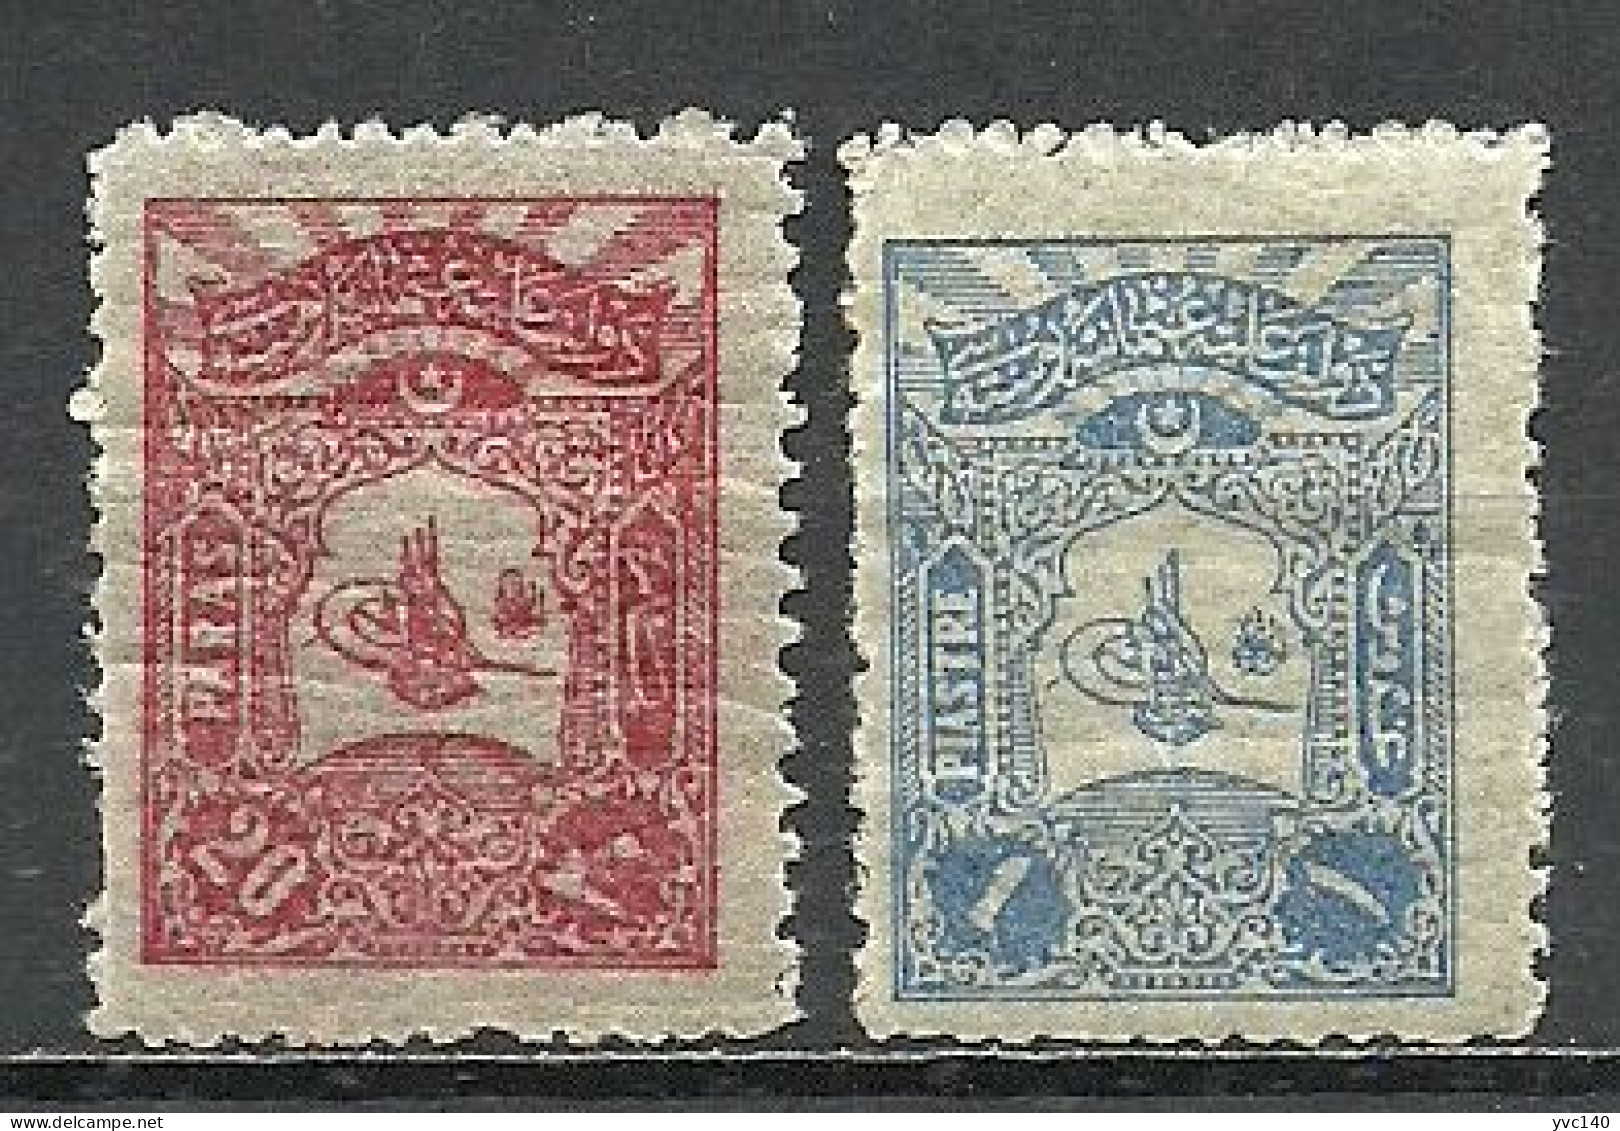 Turkey; 1905 Postage Stamps With Rays "Perf. 13 1/2x12 Instead Of 12" - Unused Stamps